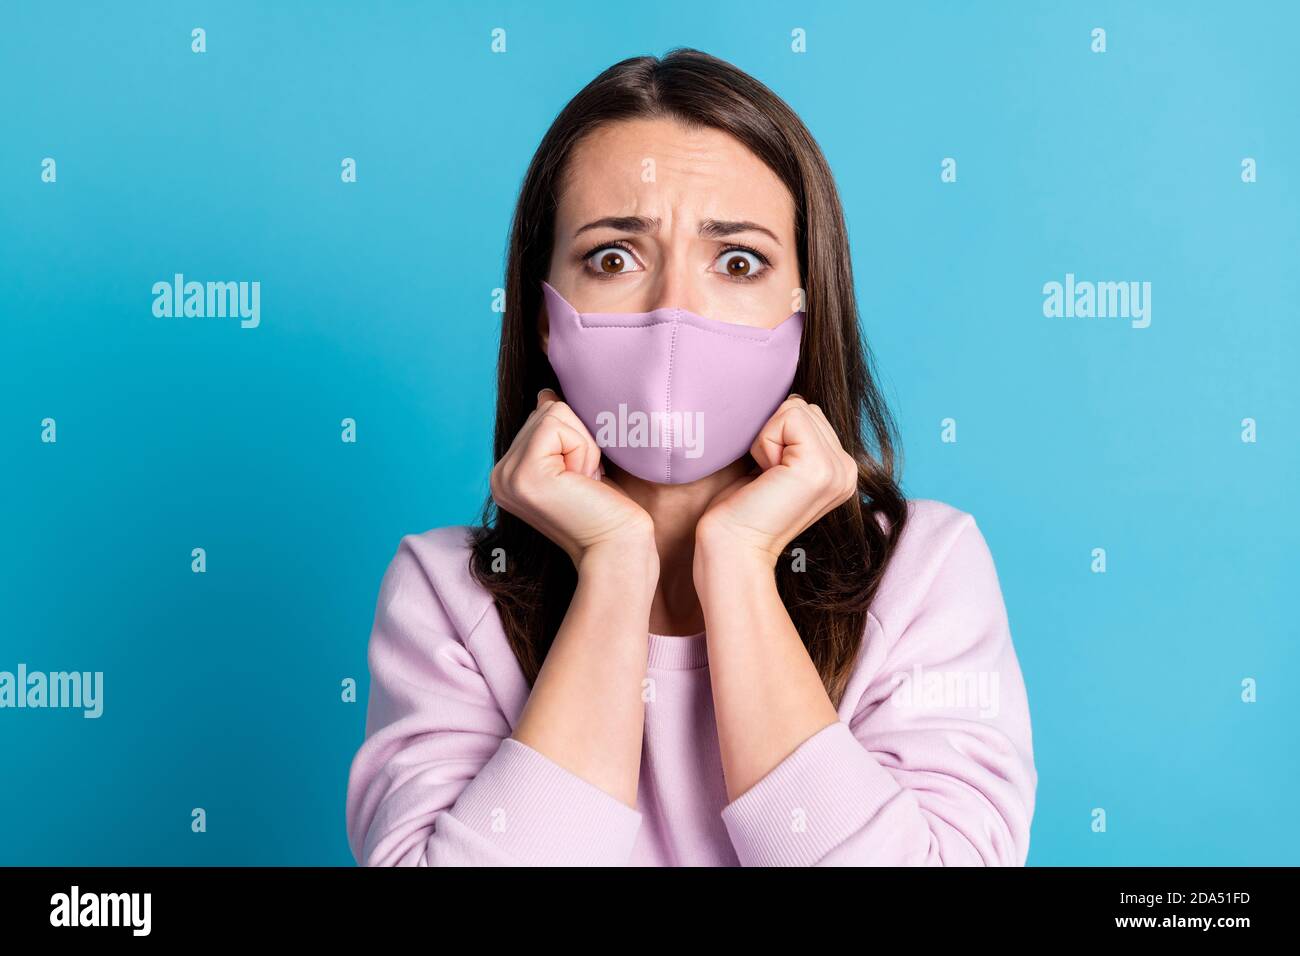 Scared face of girl stock photo. Image of madness, person - 28518734